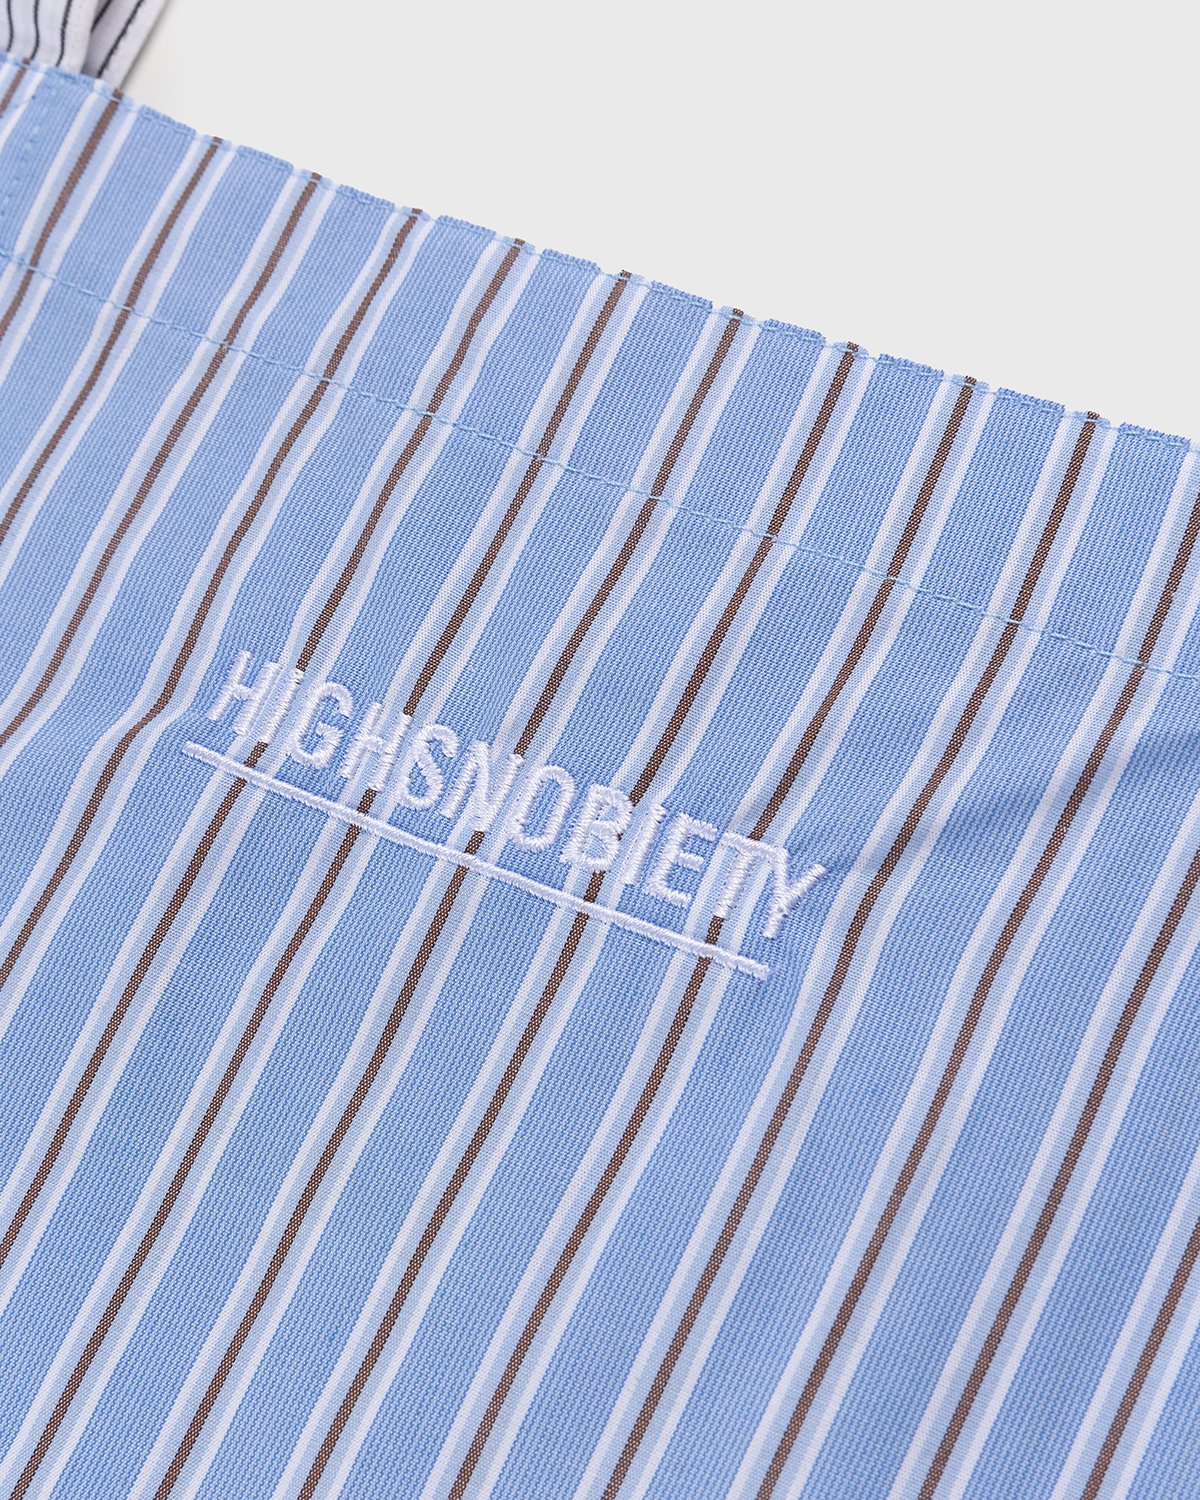 Highsnobiety - Shirting Laundry Bag Blue - Accessories - Blue - Image 4